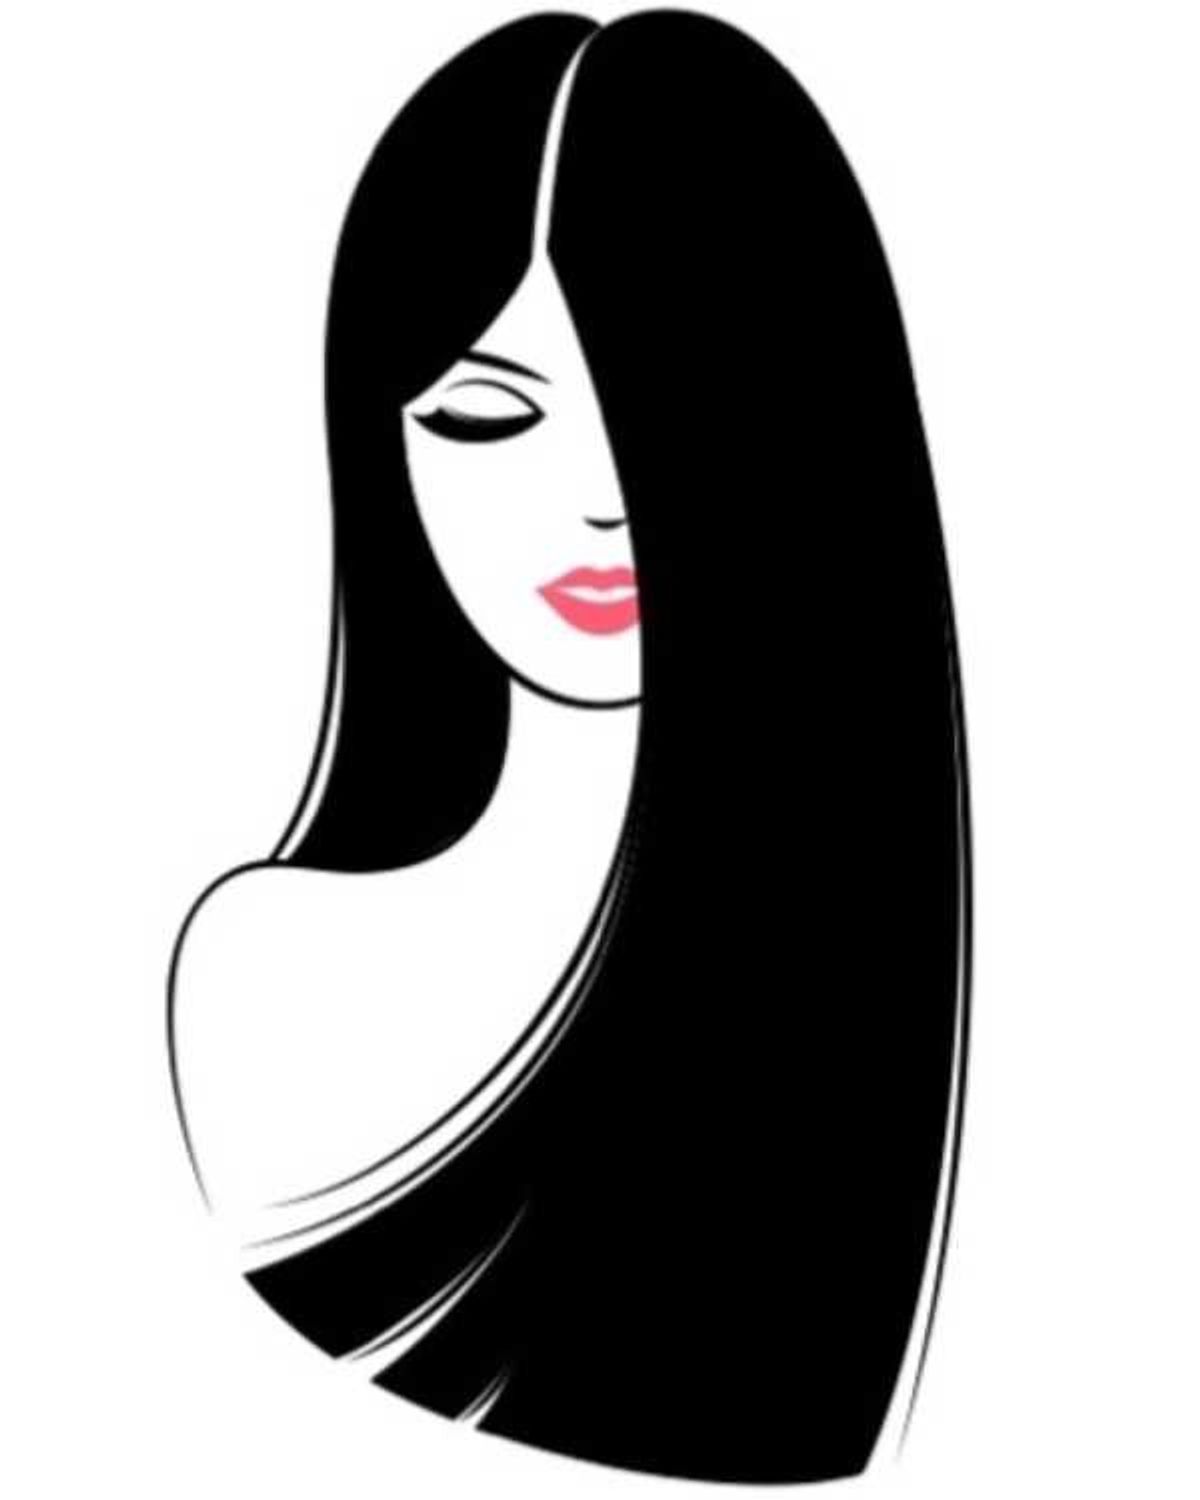 10 Things Girls With Straight Hair Can Relate To